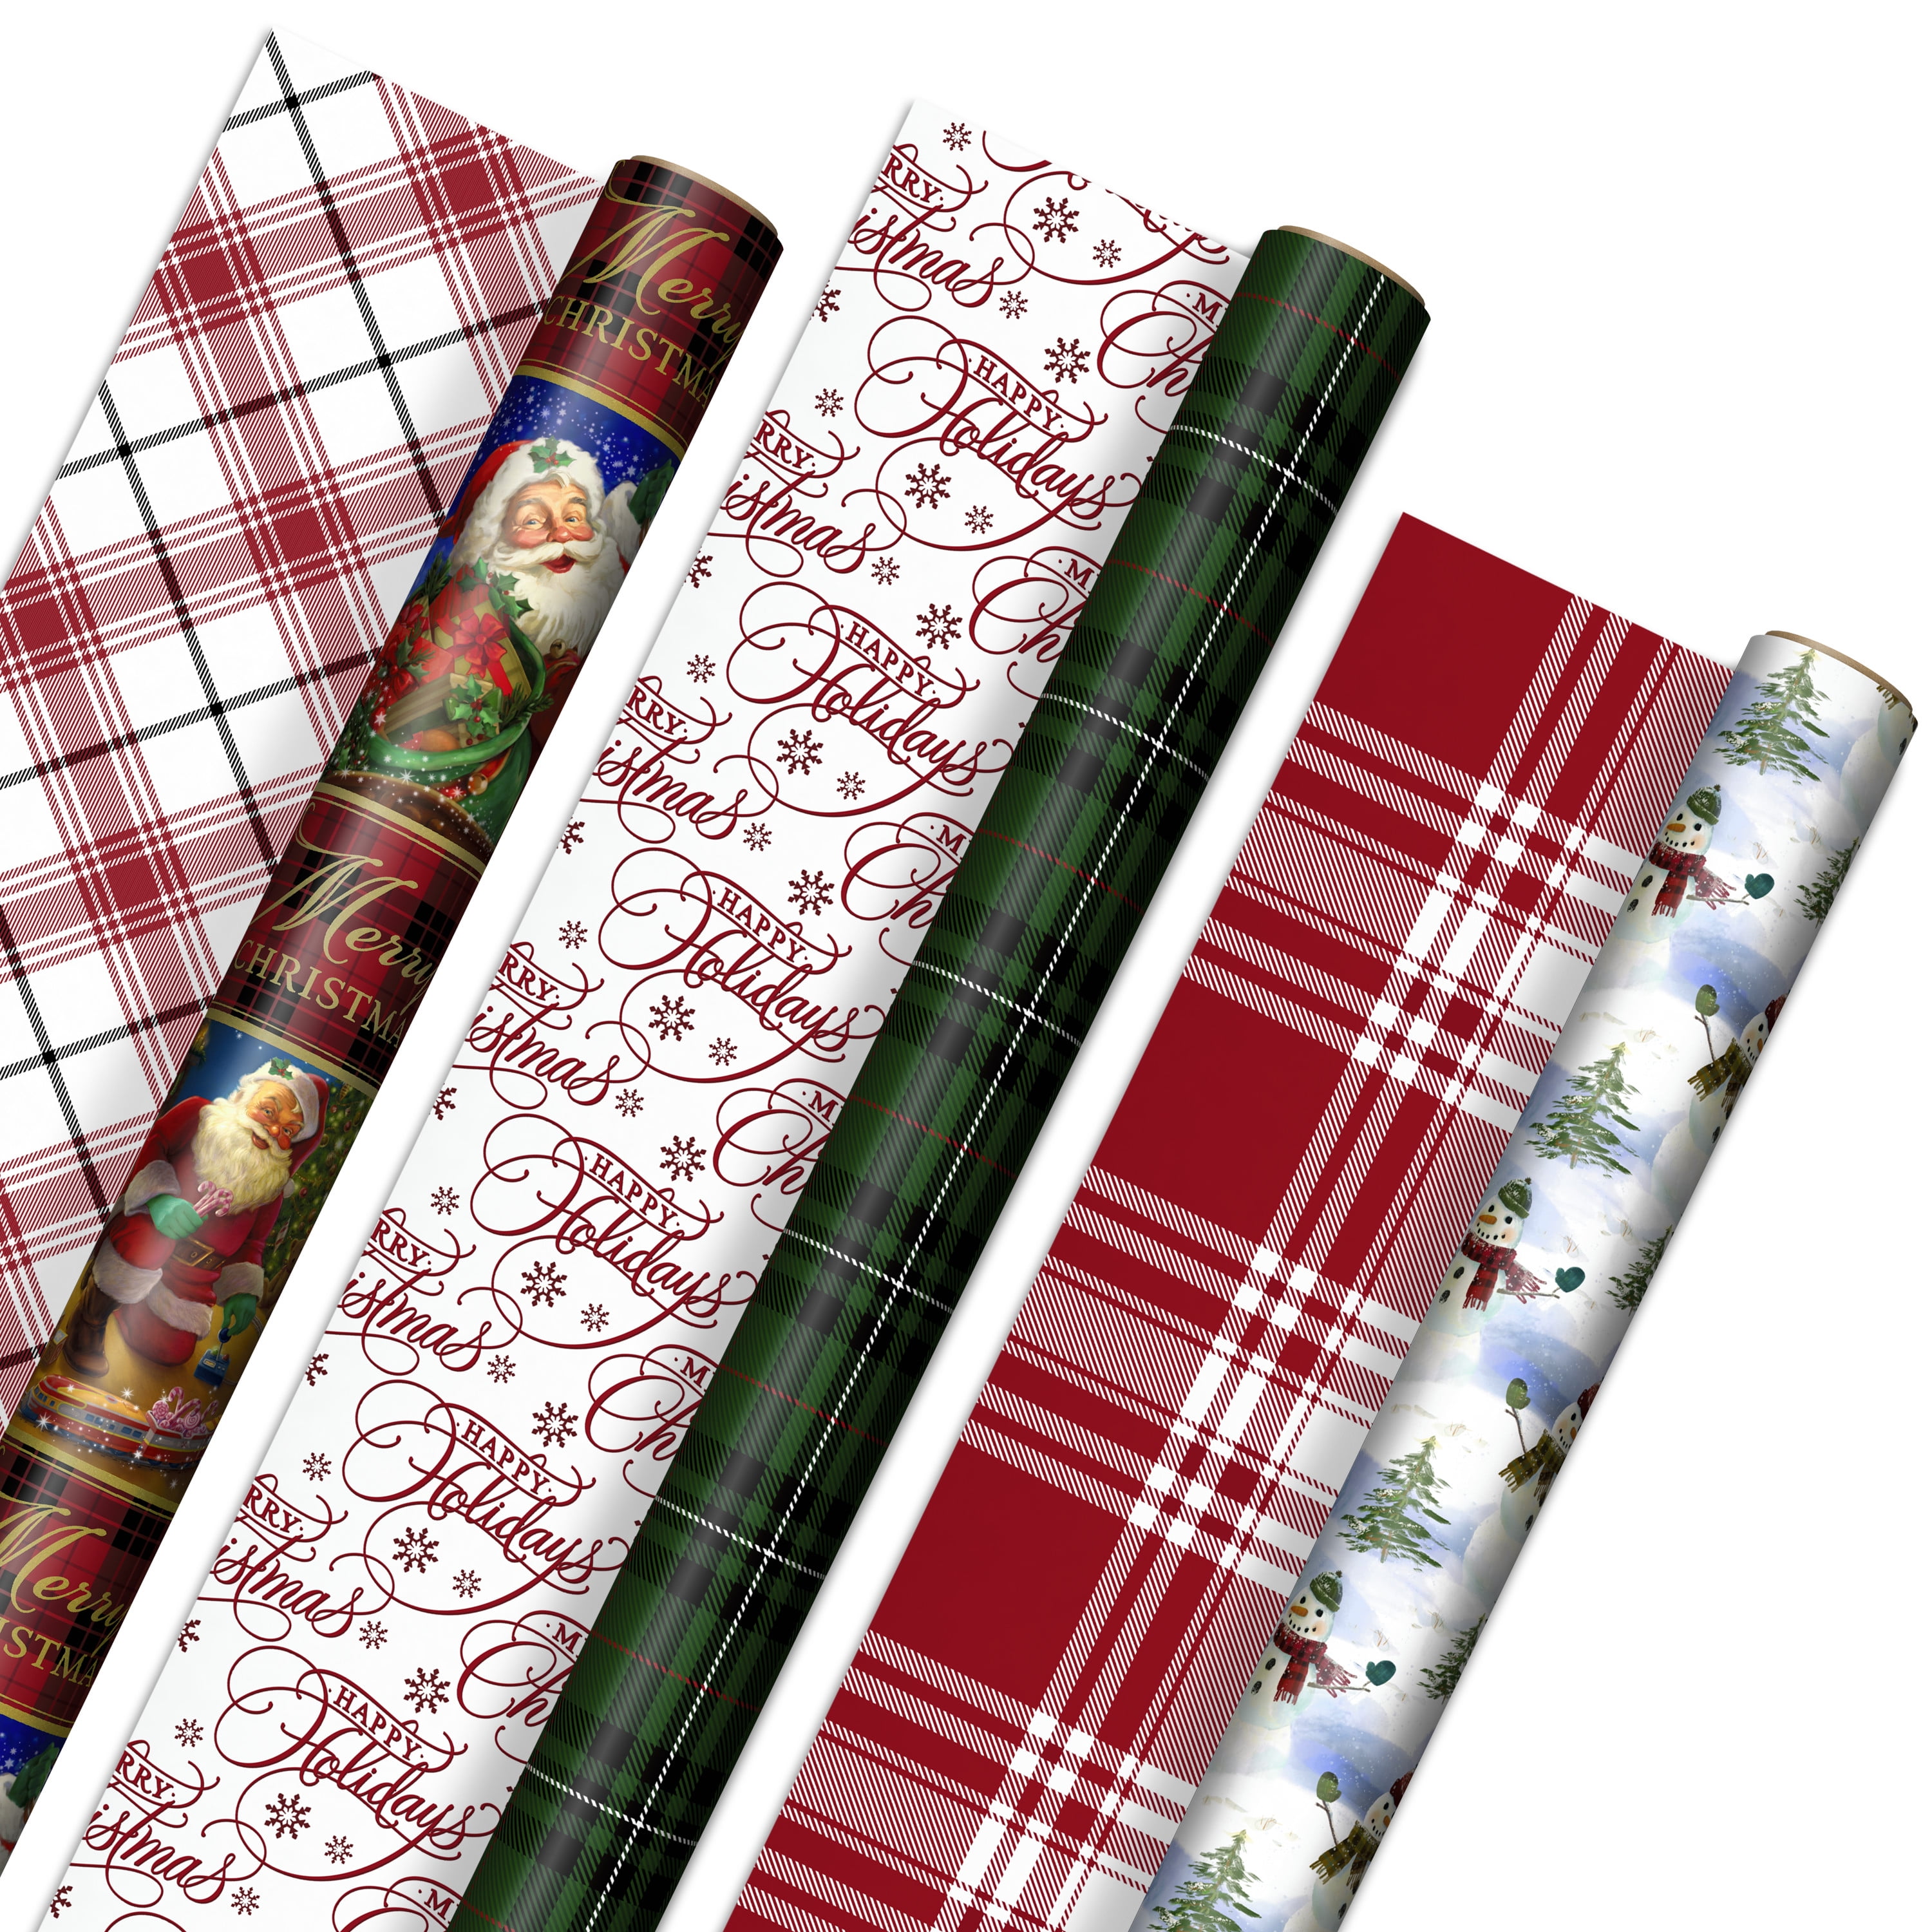 6 Hallmark Christmas Present Gift Wrapping Paper 2 x 3mtr Assorted Designs 